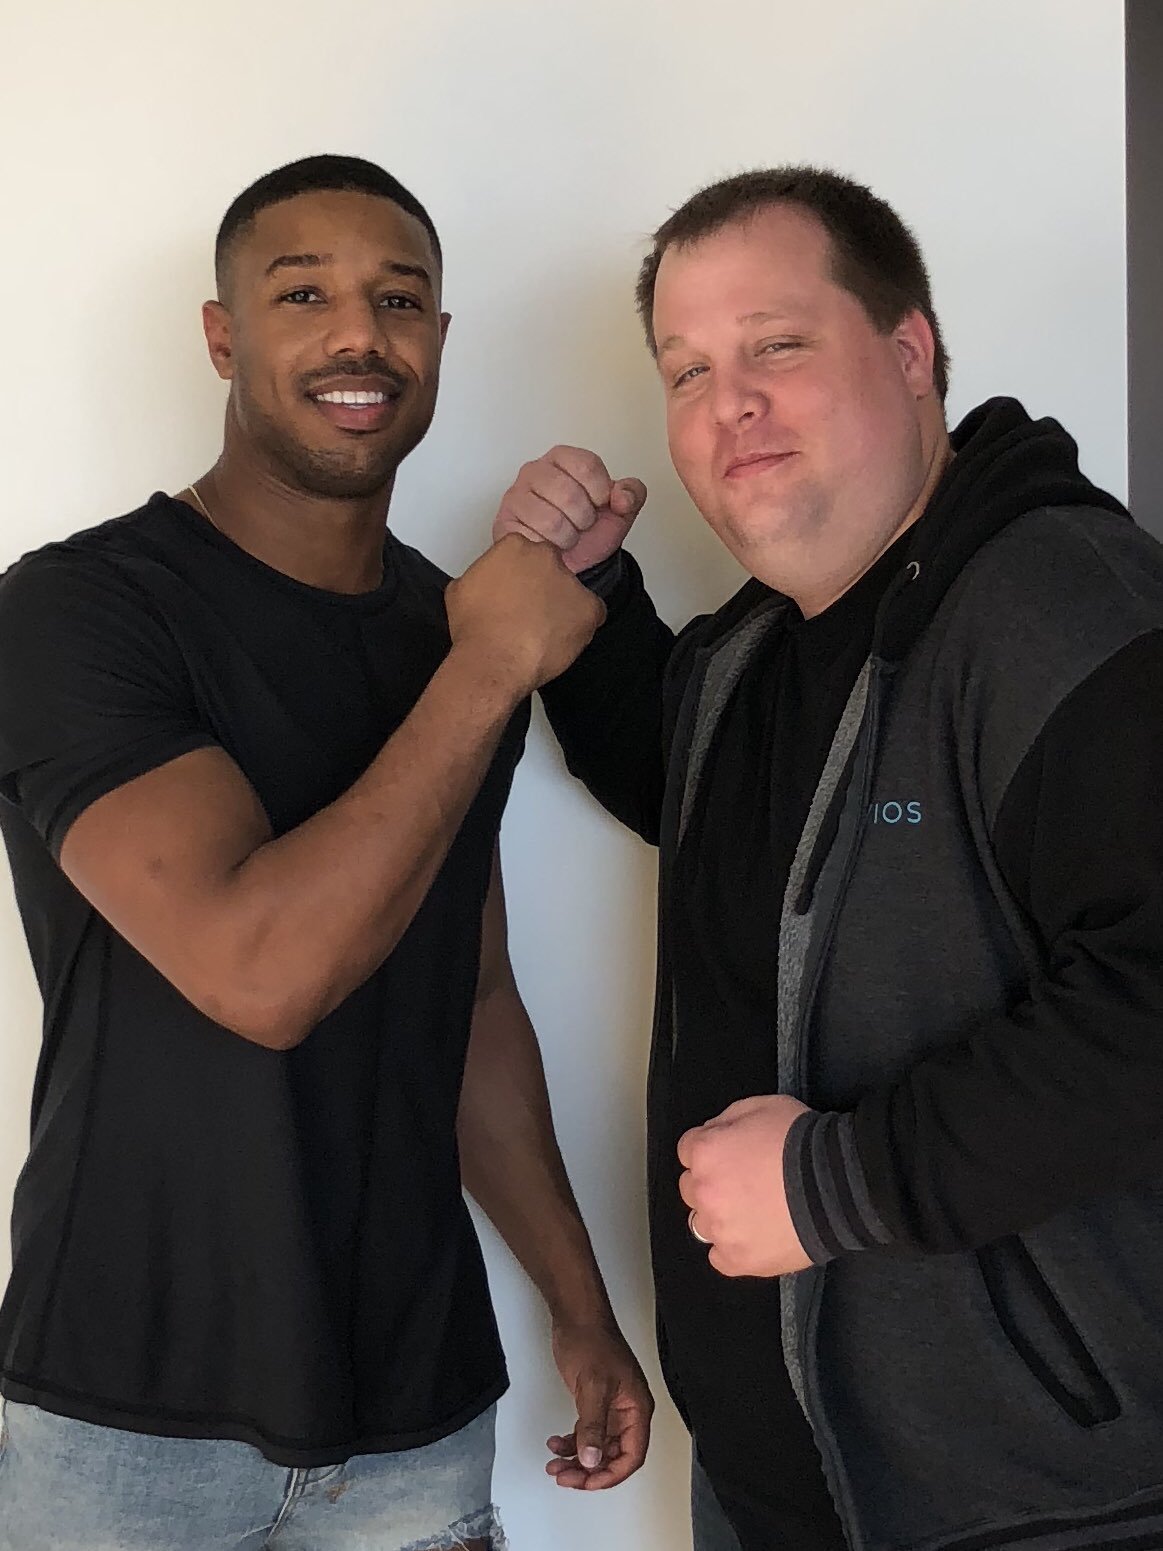 Mike McTyre with Creed actor Michael B. Jordan (Image: Twitter)